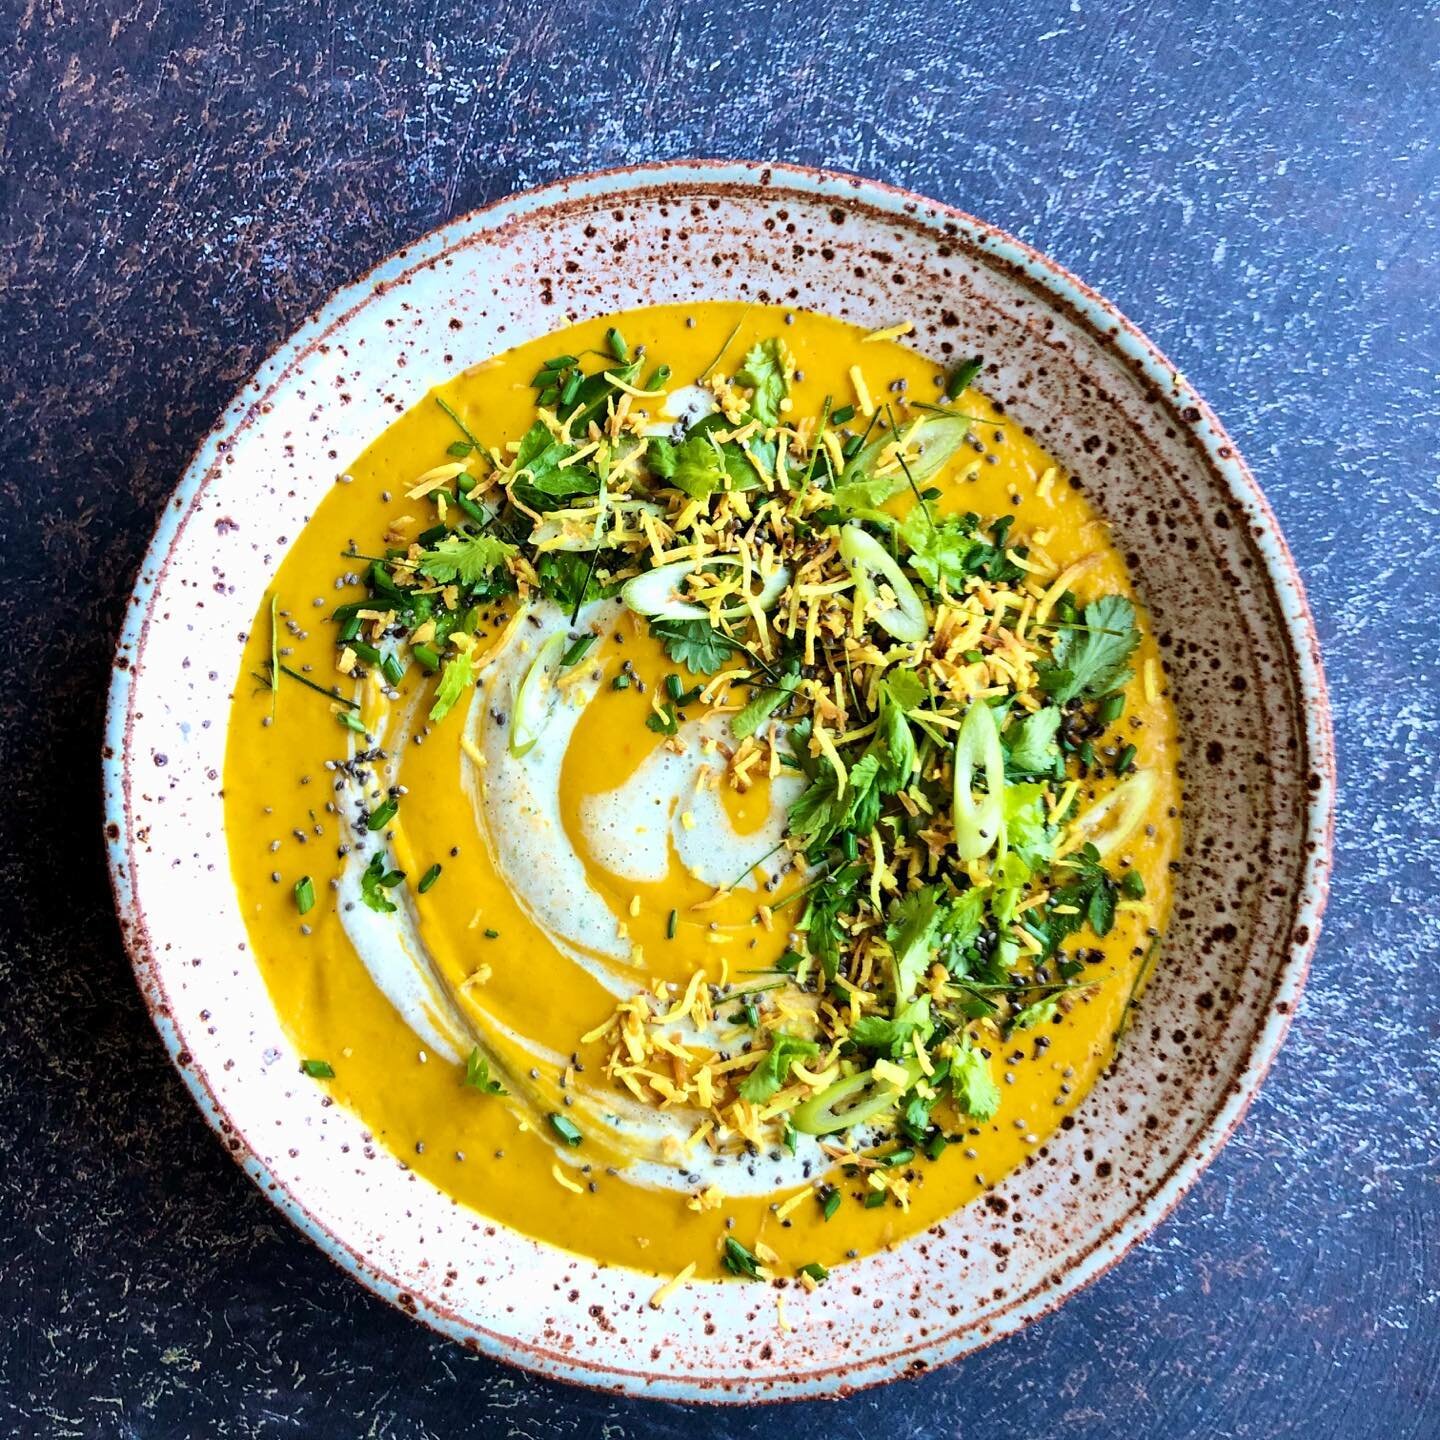 Creamy pumpkin and coconut soup with all my favourite Thai flavours. Topped with lots of yummy crunchy goodness!
And thanks to @paulinemeadeceramics for the stunning bowl!

Check out the recipe at www.dearfig.com

#pumpkinsoup #veganrecipes #plantbas